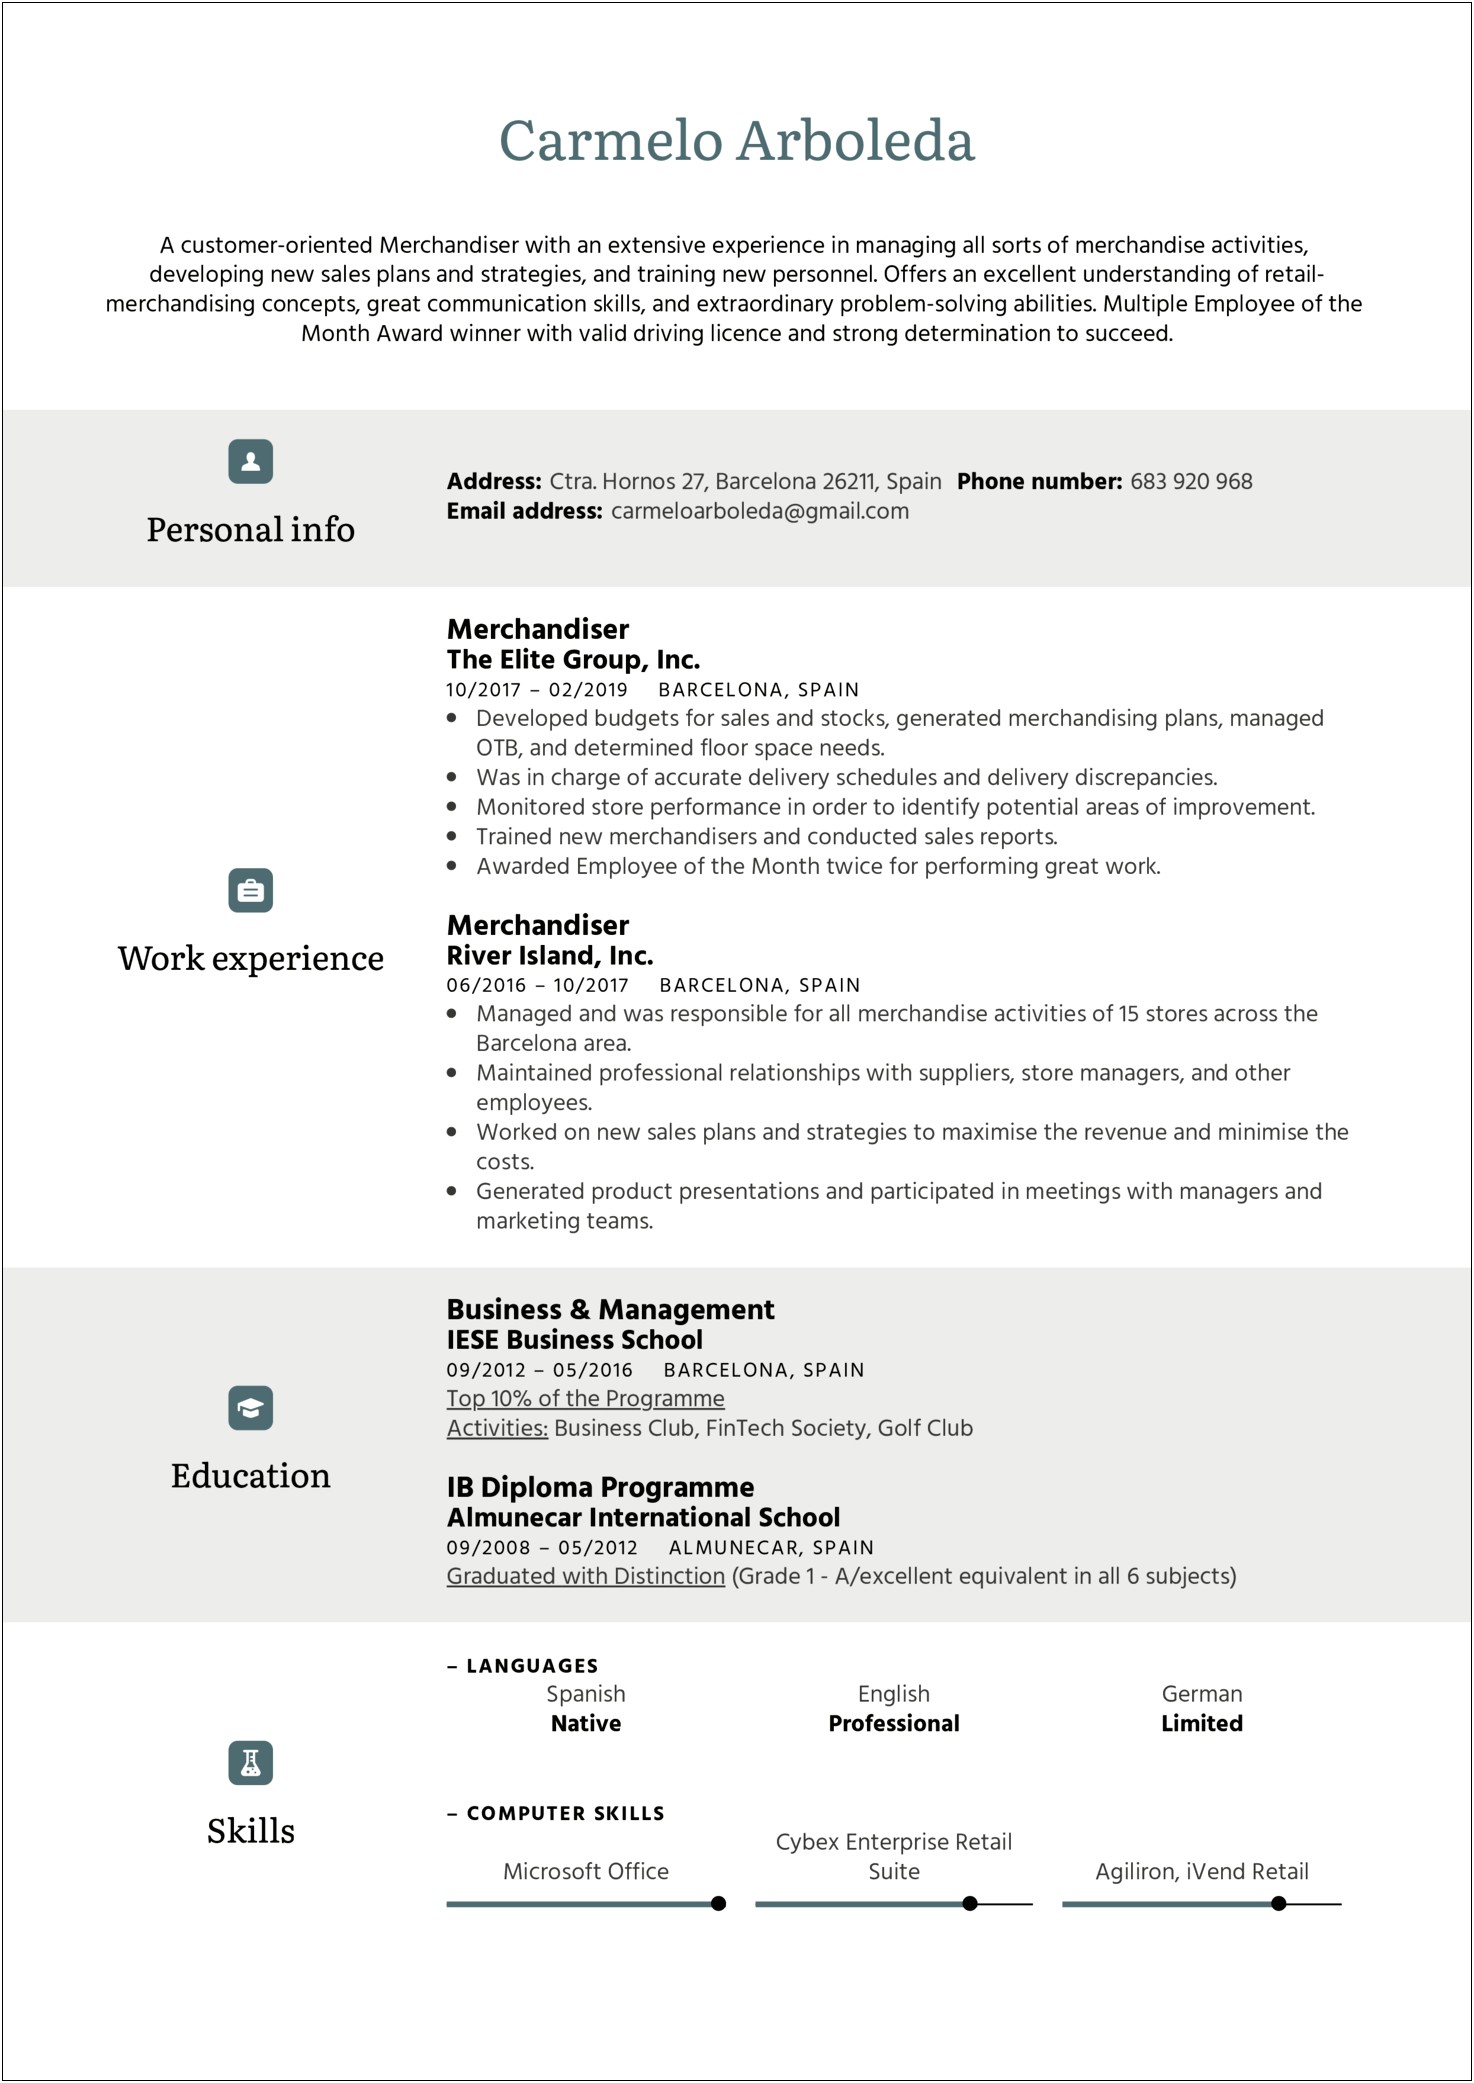 Employee Of The Mnth Description Resume